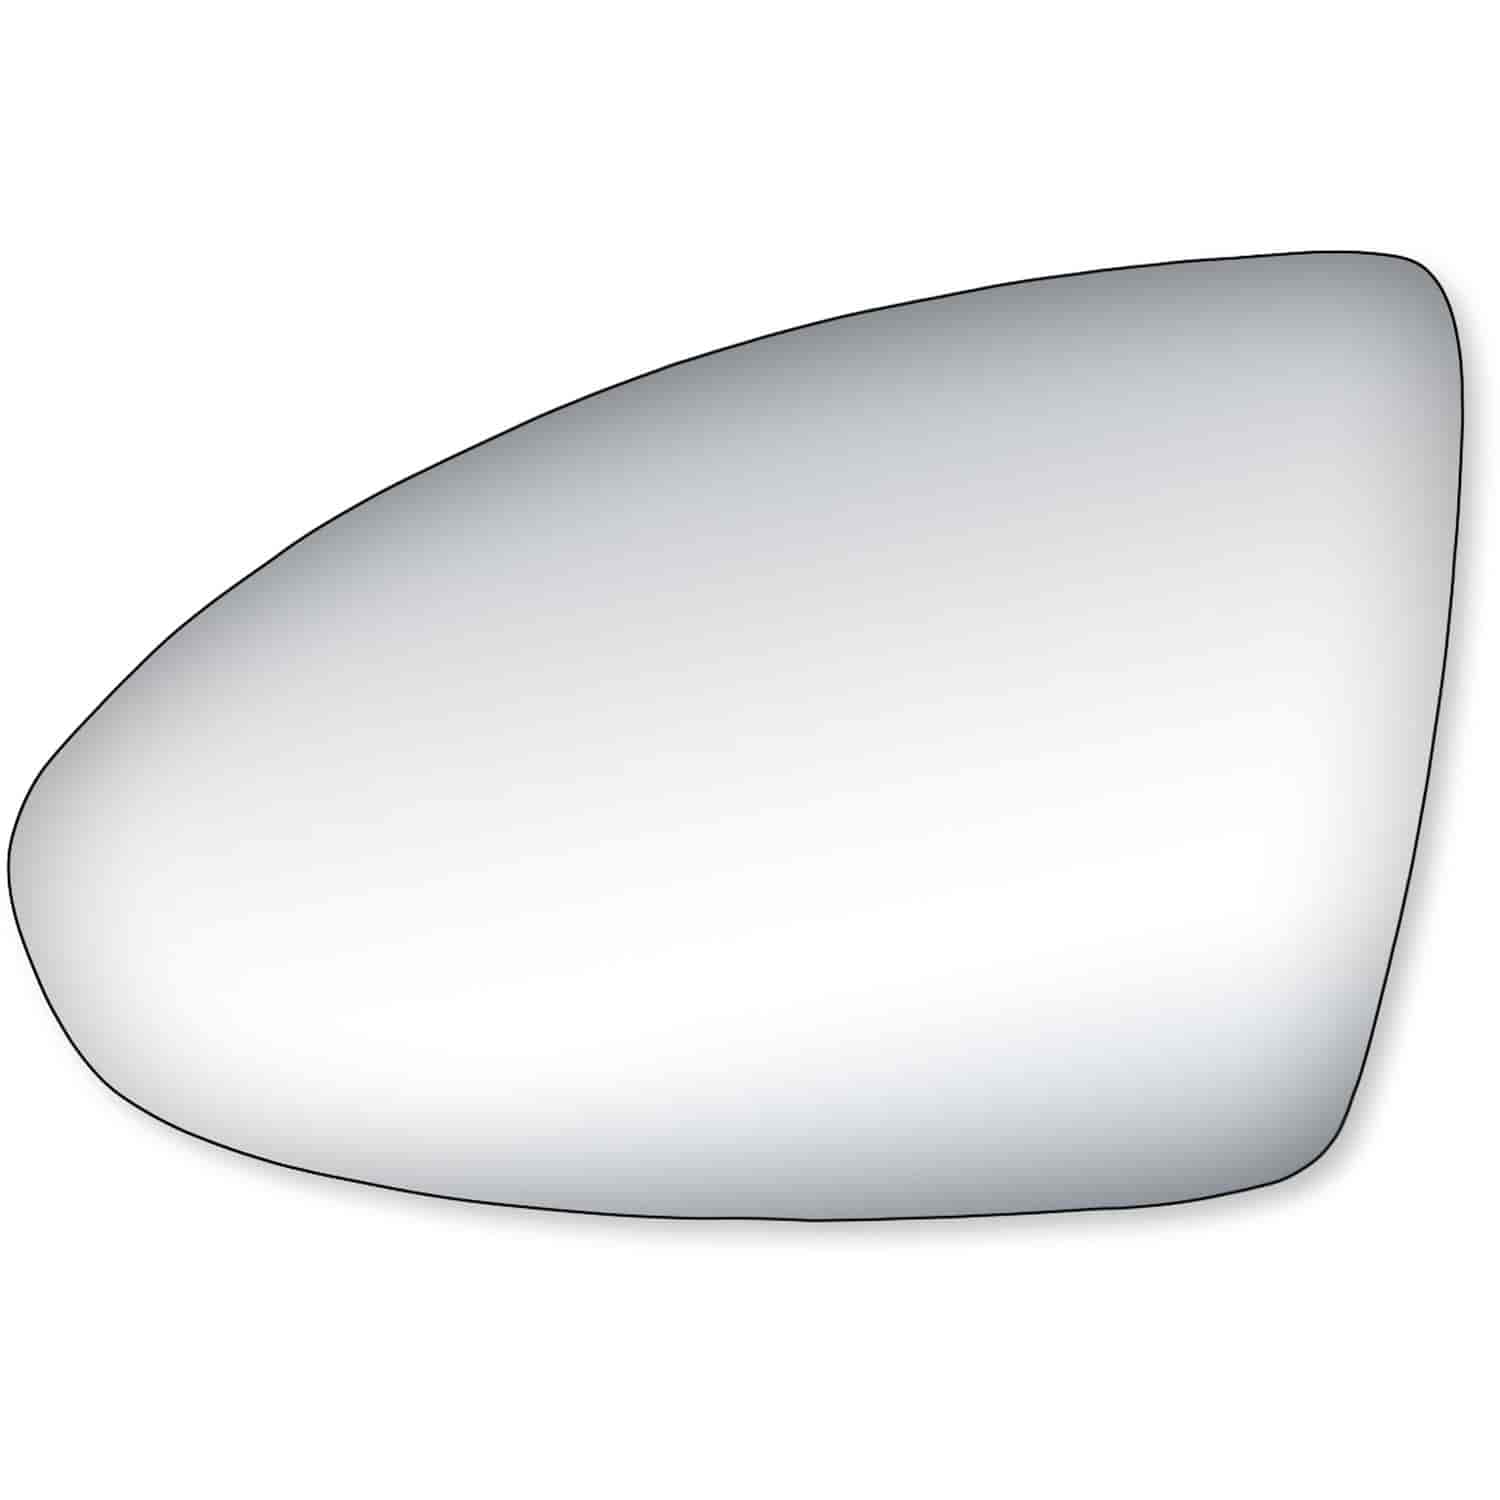 Replacement Glass for 11-14 Cruze w/out blind spot lens the glass measures 4 1/2 tall by 7 1/16 wide